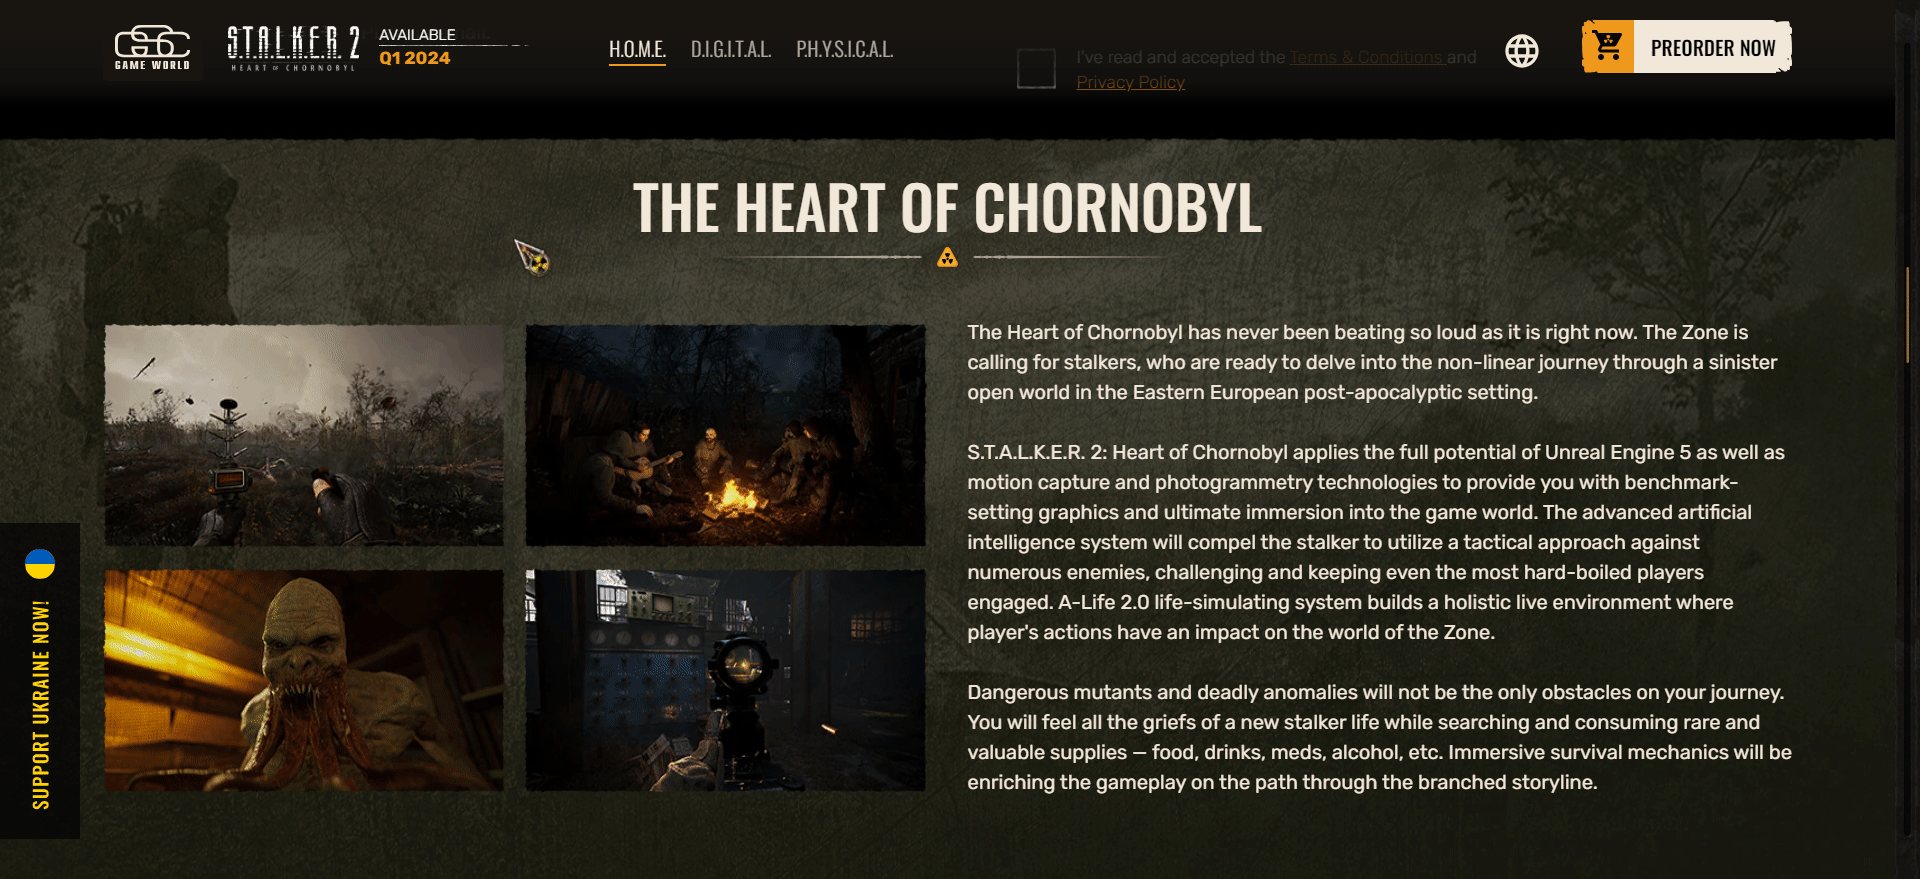 S.T.A.L.K.E.R. 2 website example showing the story of the game. 